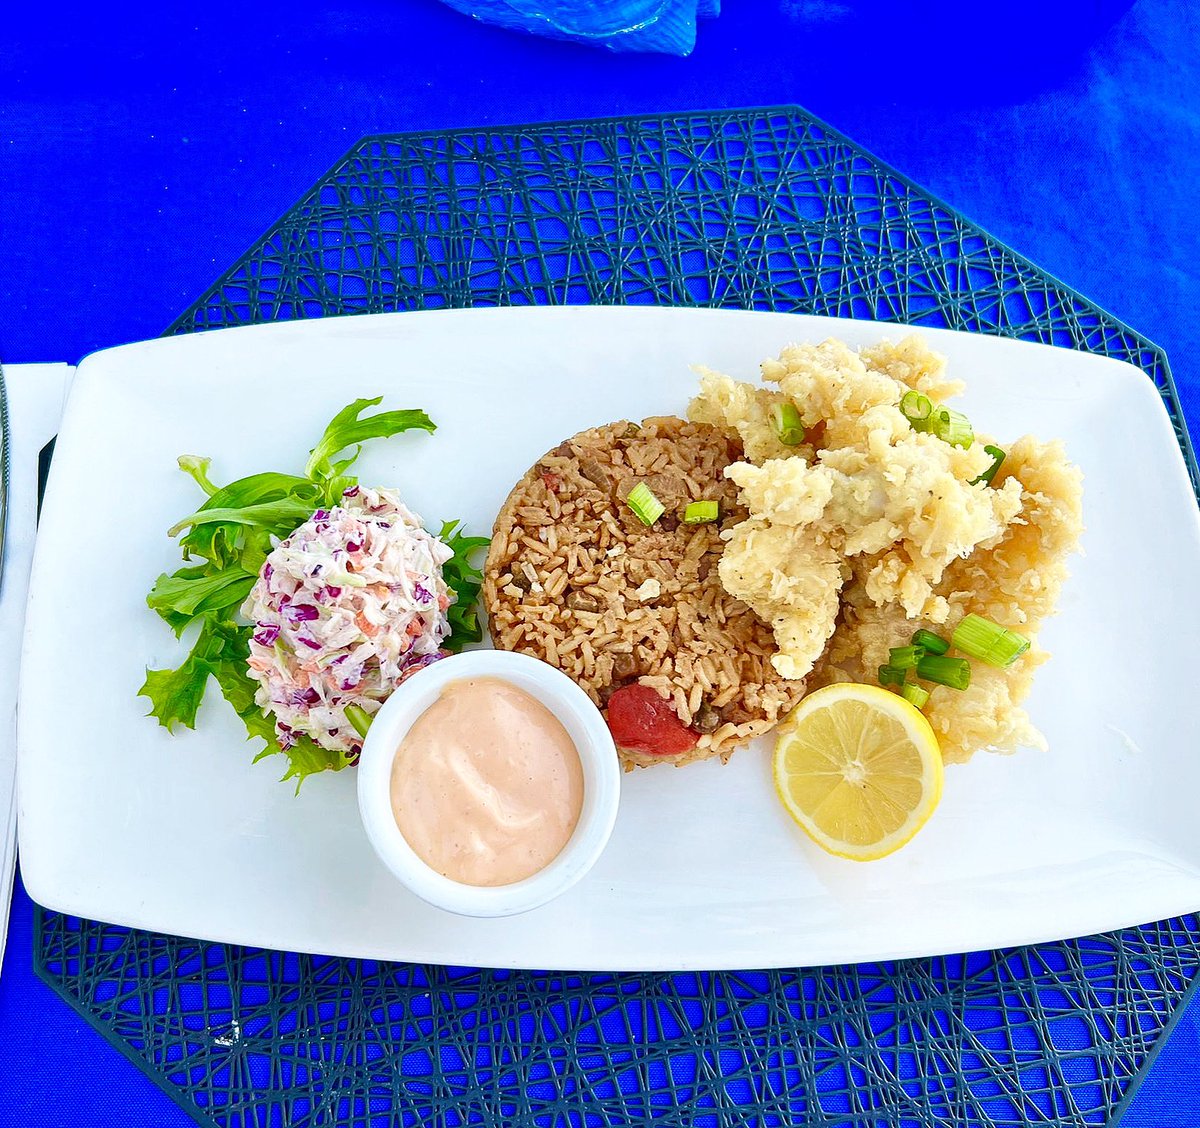 Cracked Conch Dinner at The Blue Conch. It’s what we do. 💅
•
•
🩵🐚🌴🇧🇸
#conch #crackedconch #seafood #dinner #restaurant #theexumas #exuma #thebahamas🇧🇸 #bahamasstrong #travel #food #foodphotography #foodie #itsbetterinthebahamas #242totheworld🌎🇧🇸 #localeats #dining